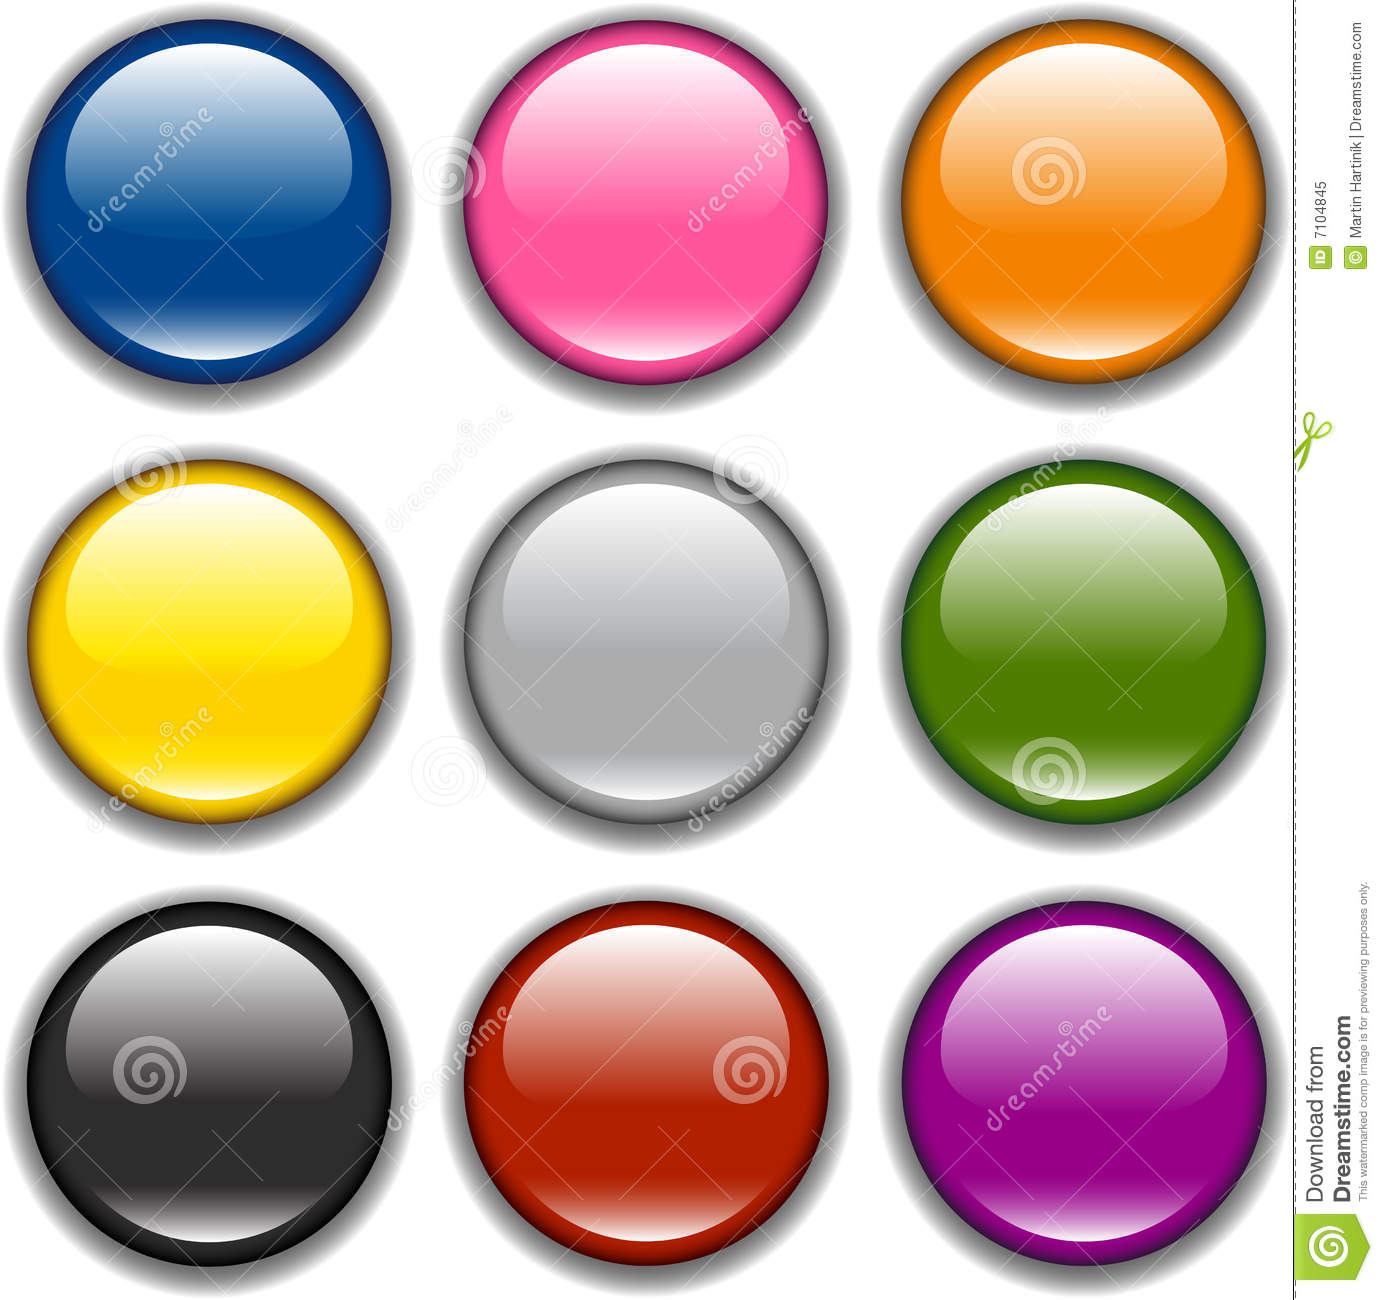 Free Button Icons Vector